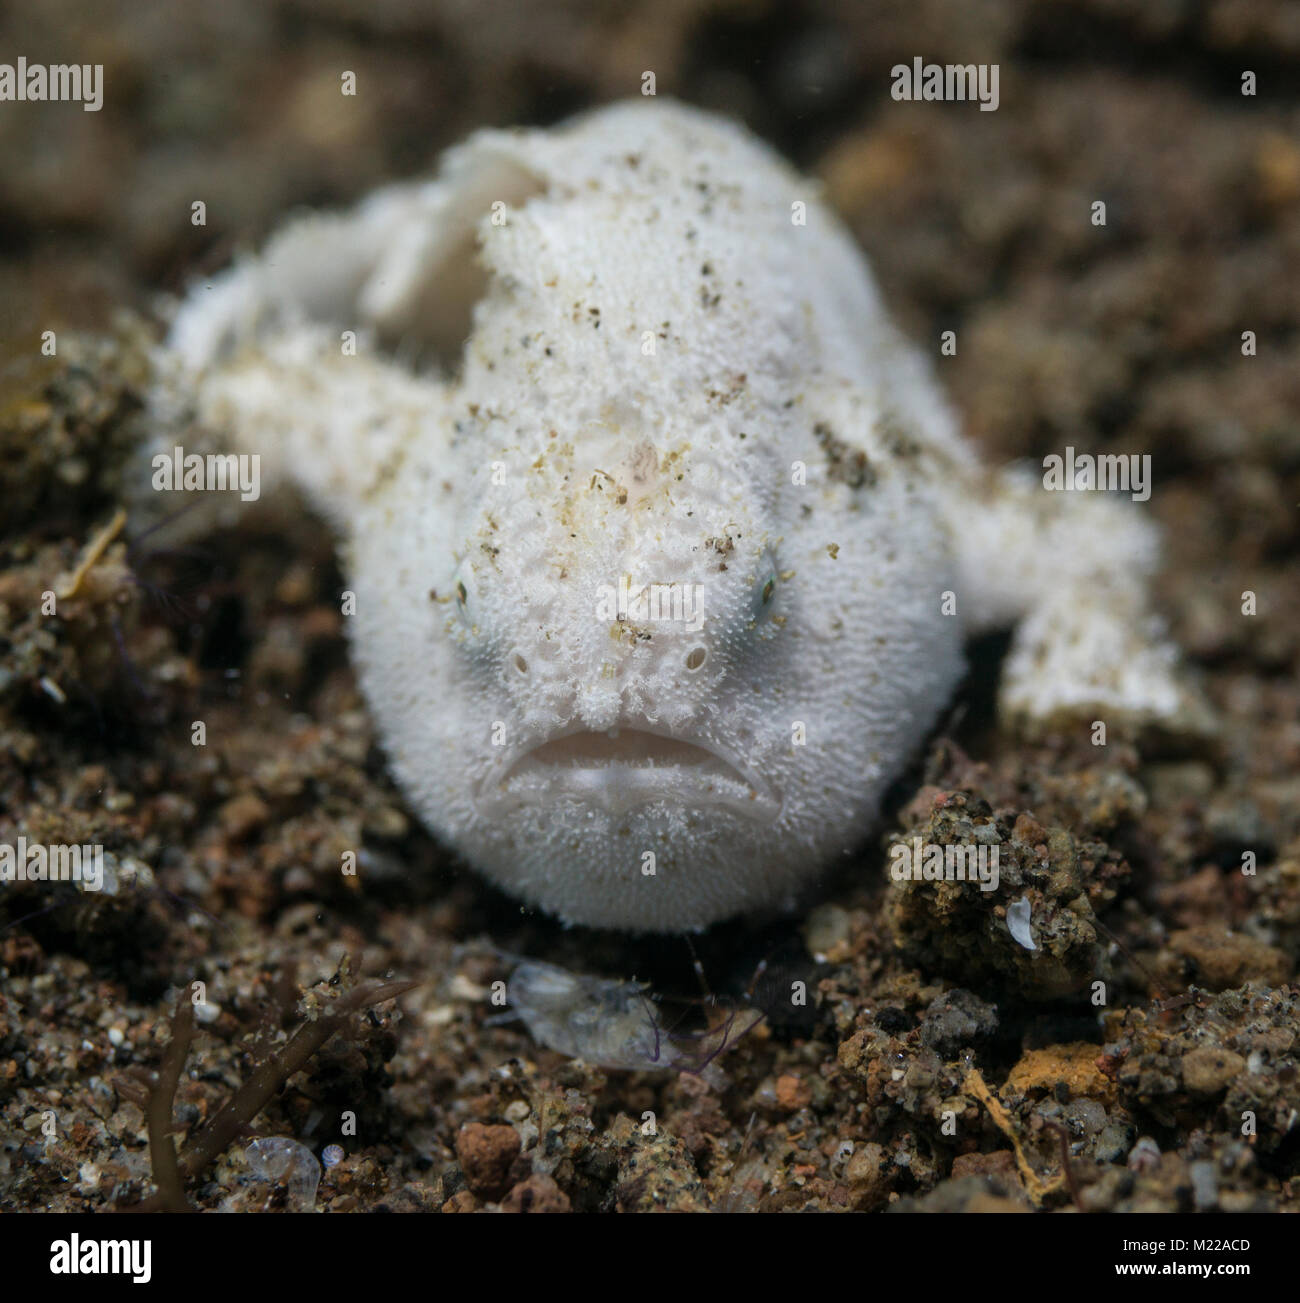 Juvenile hairy frogfish hiding in the sand Stock Photo